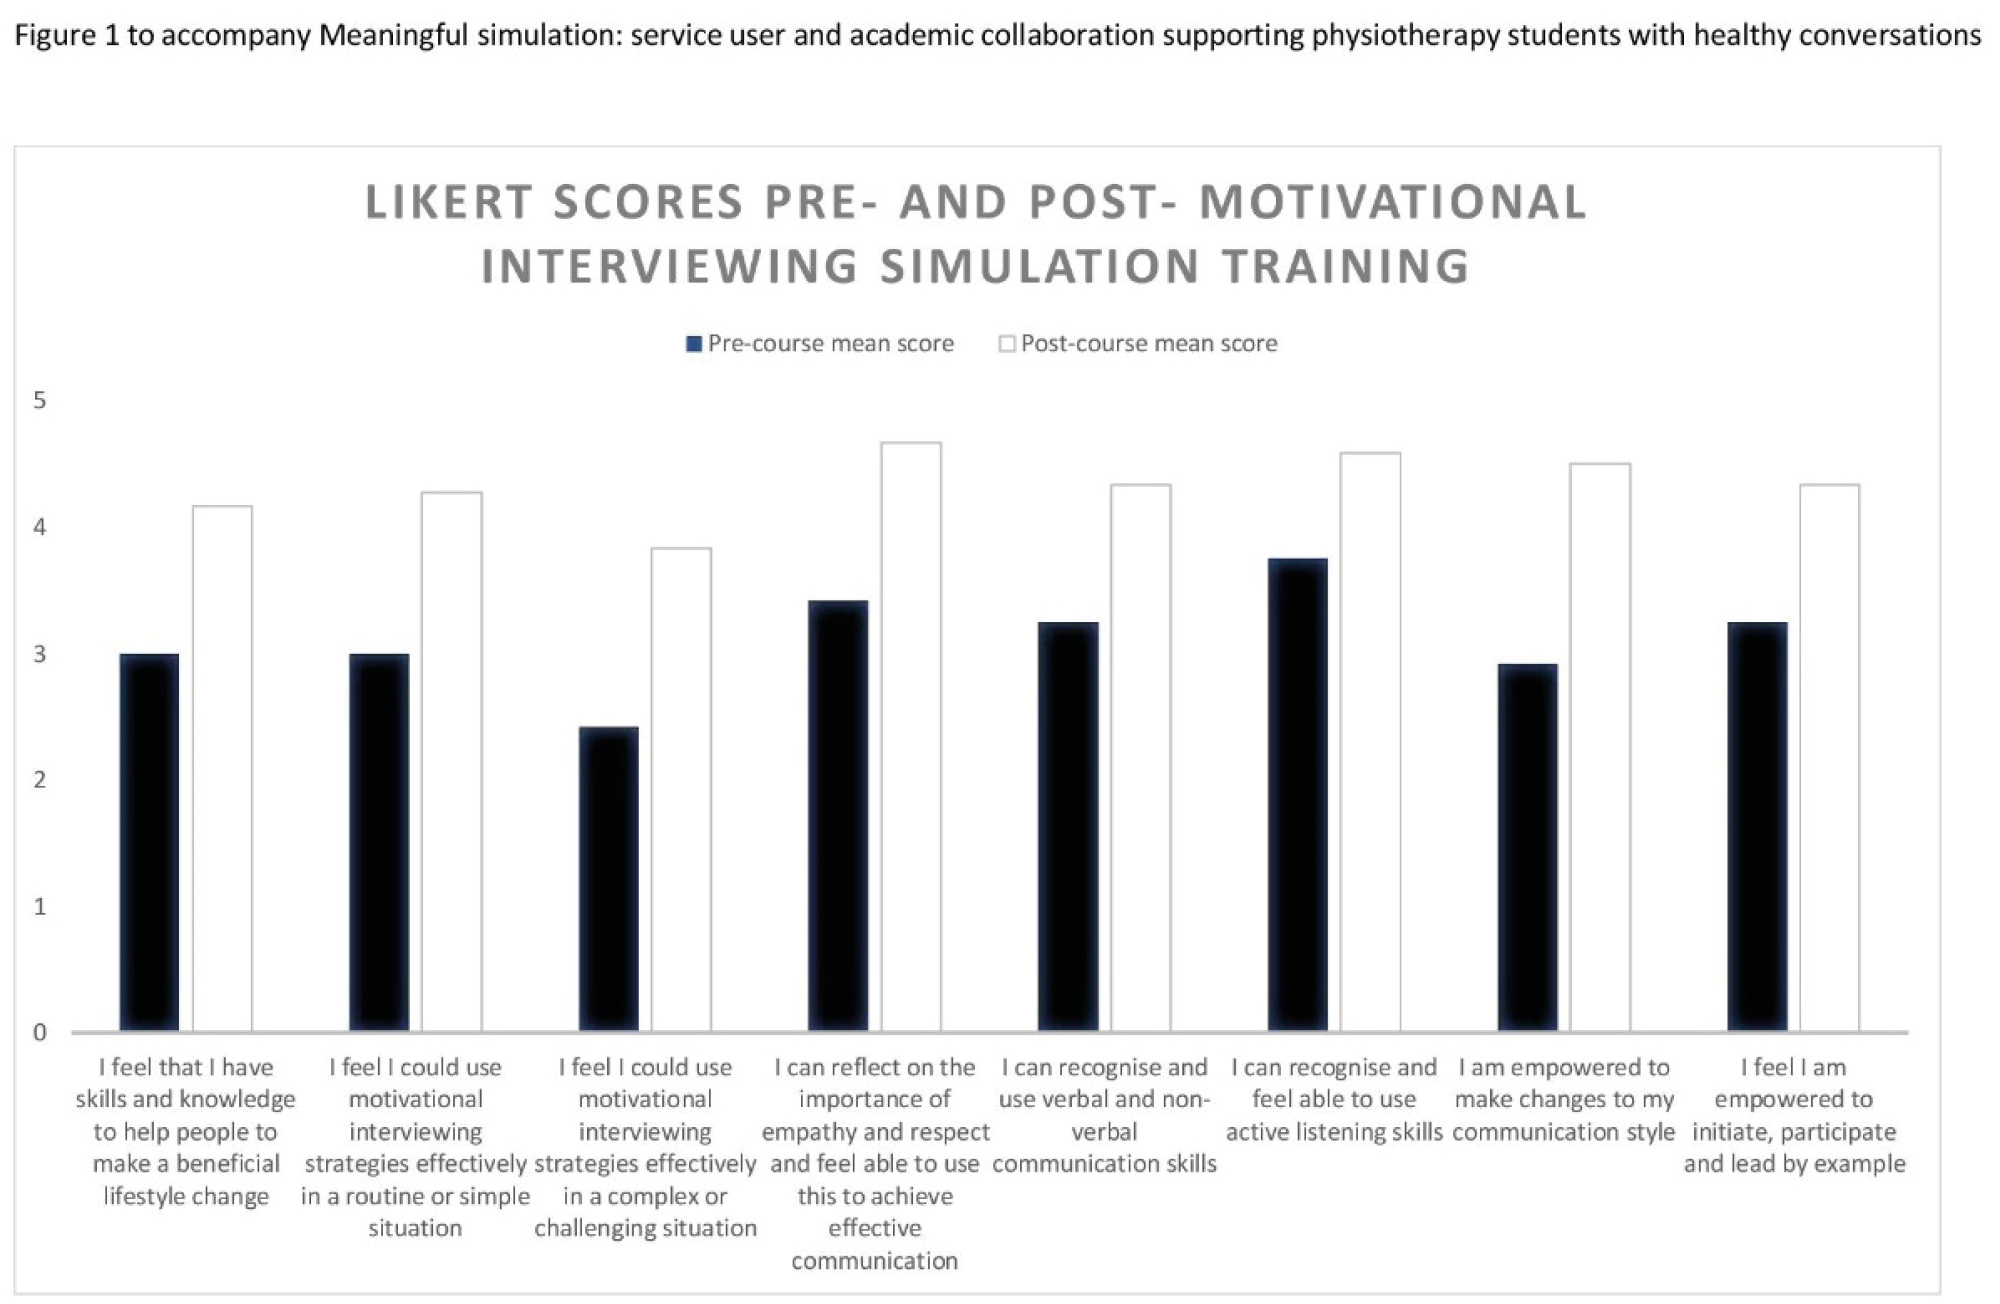 Likert scores to the pre- and post-motivational interviewing simulation training